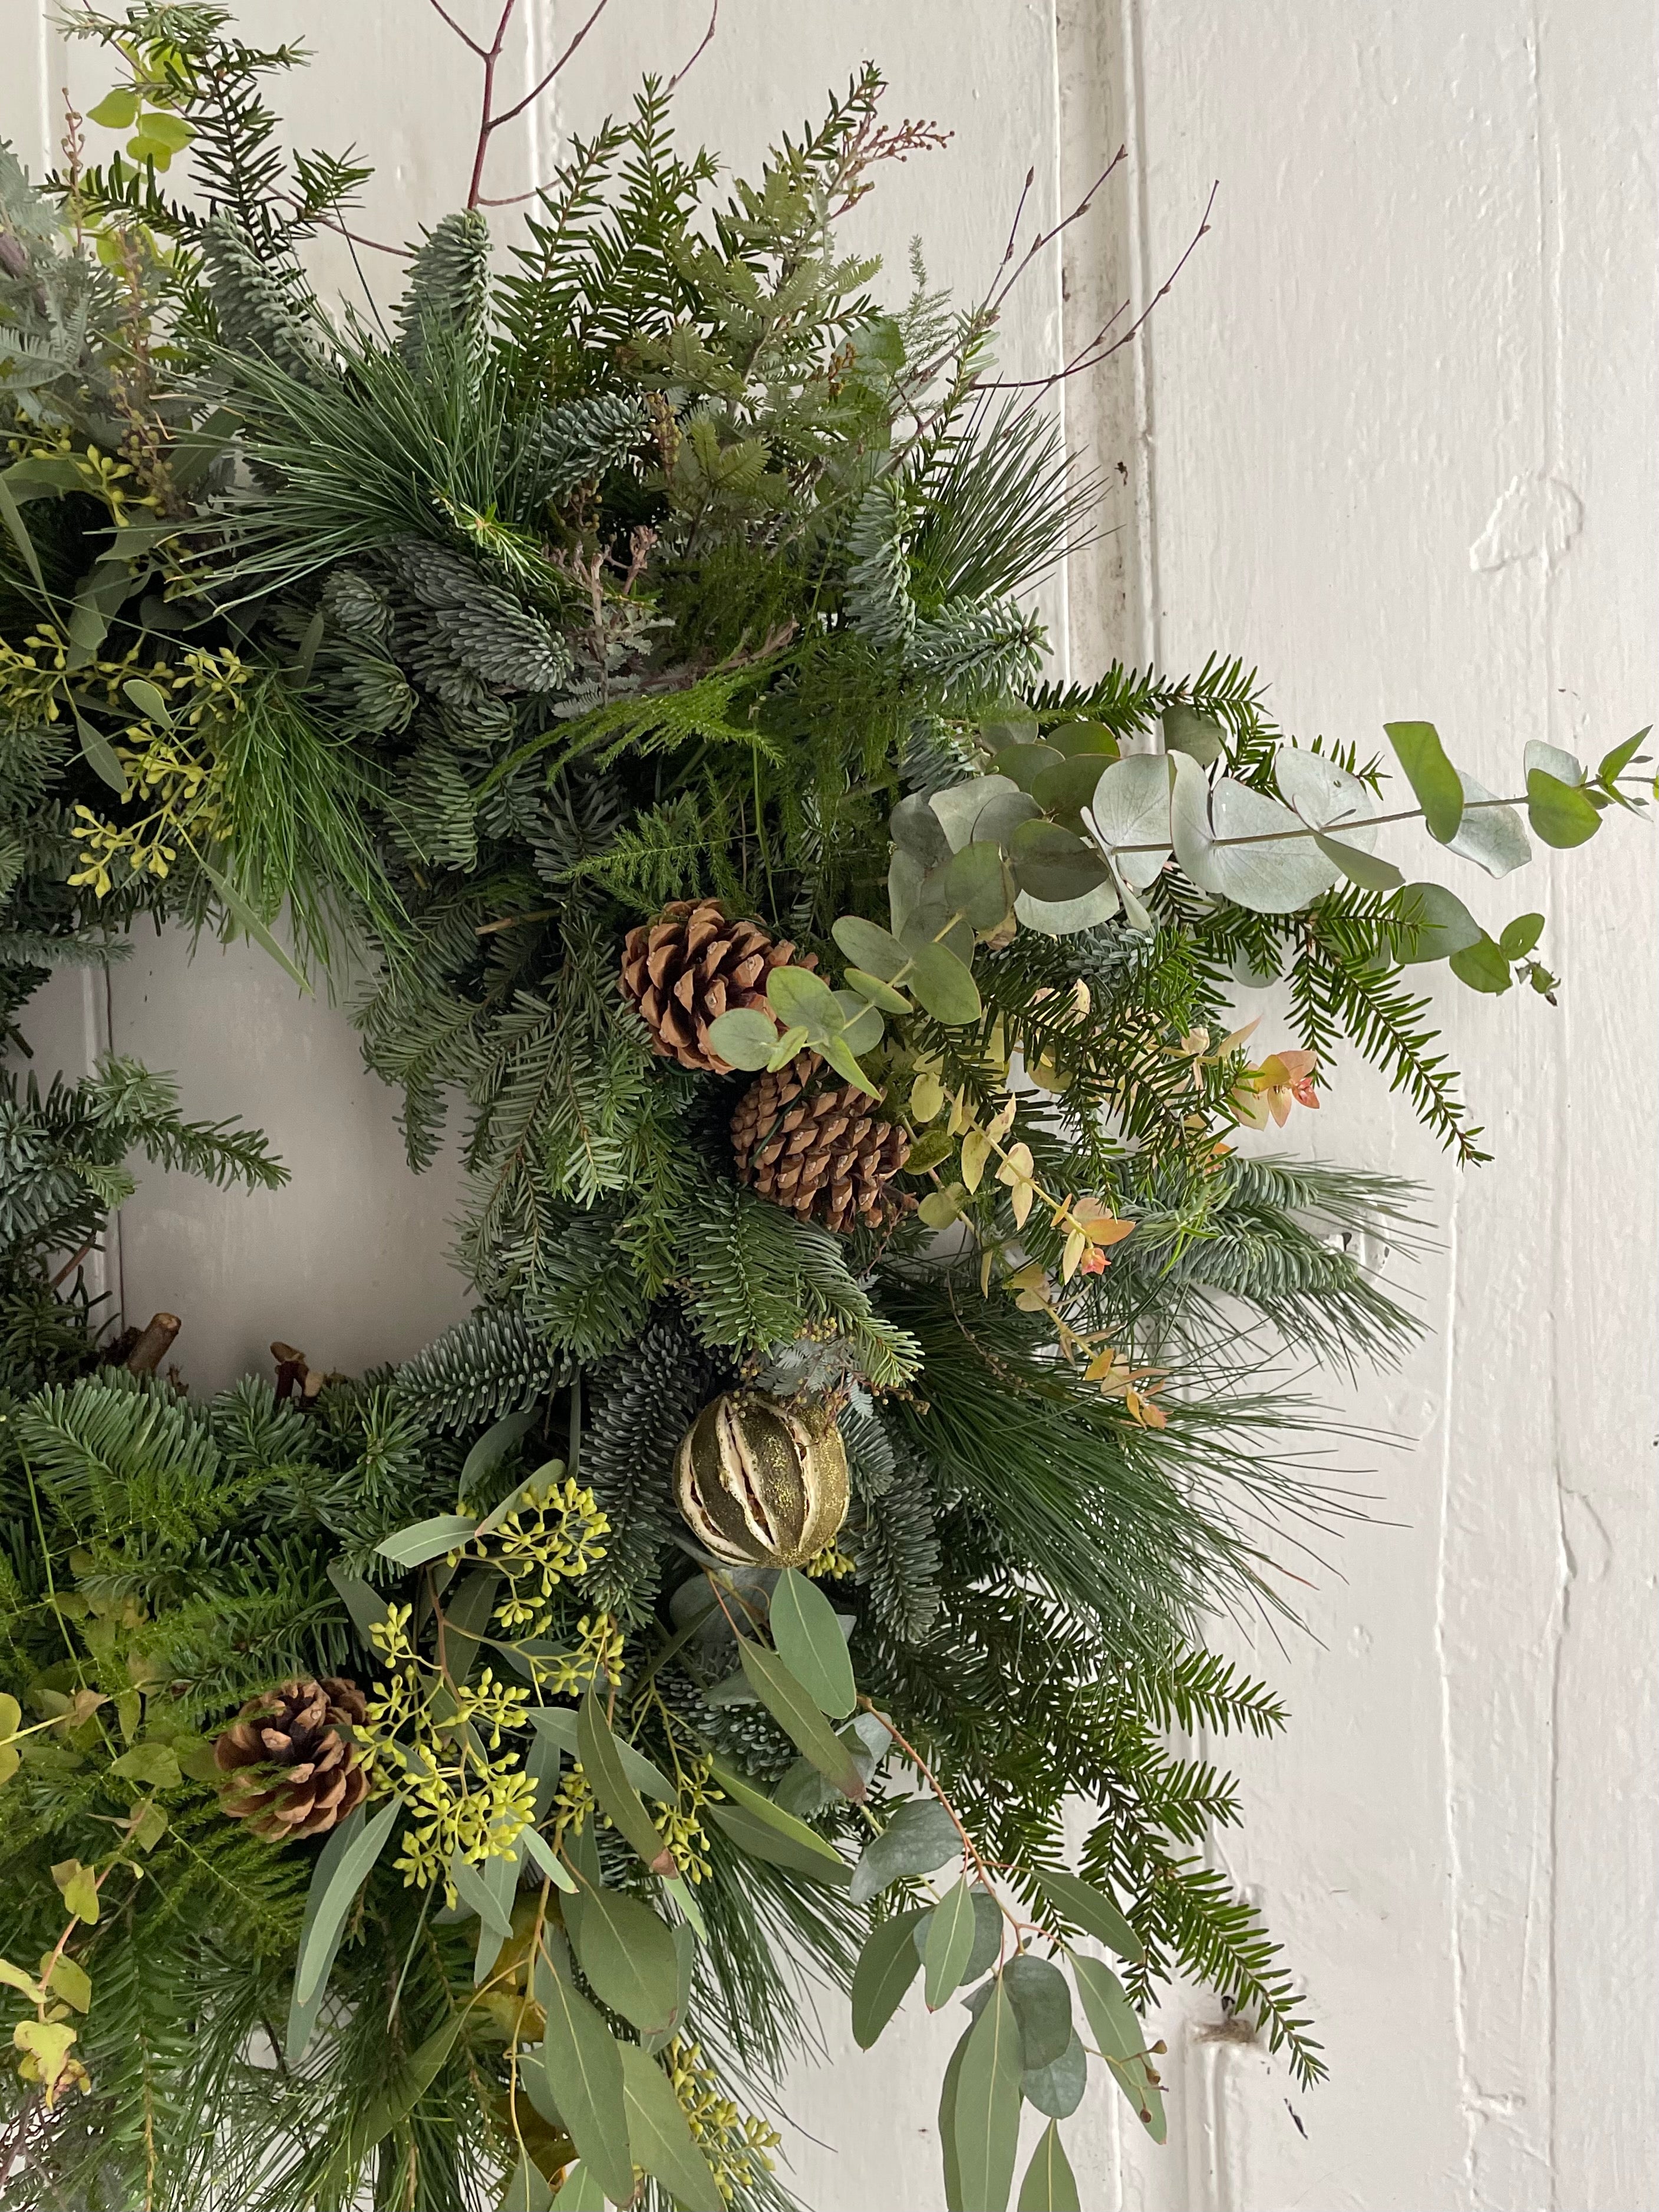 The Luxe Wreath